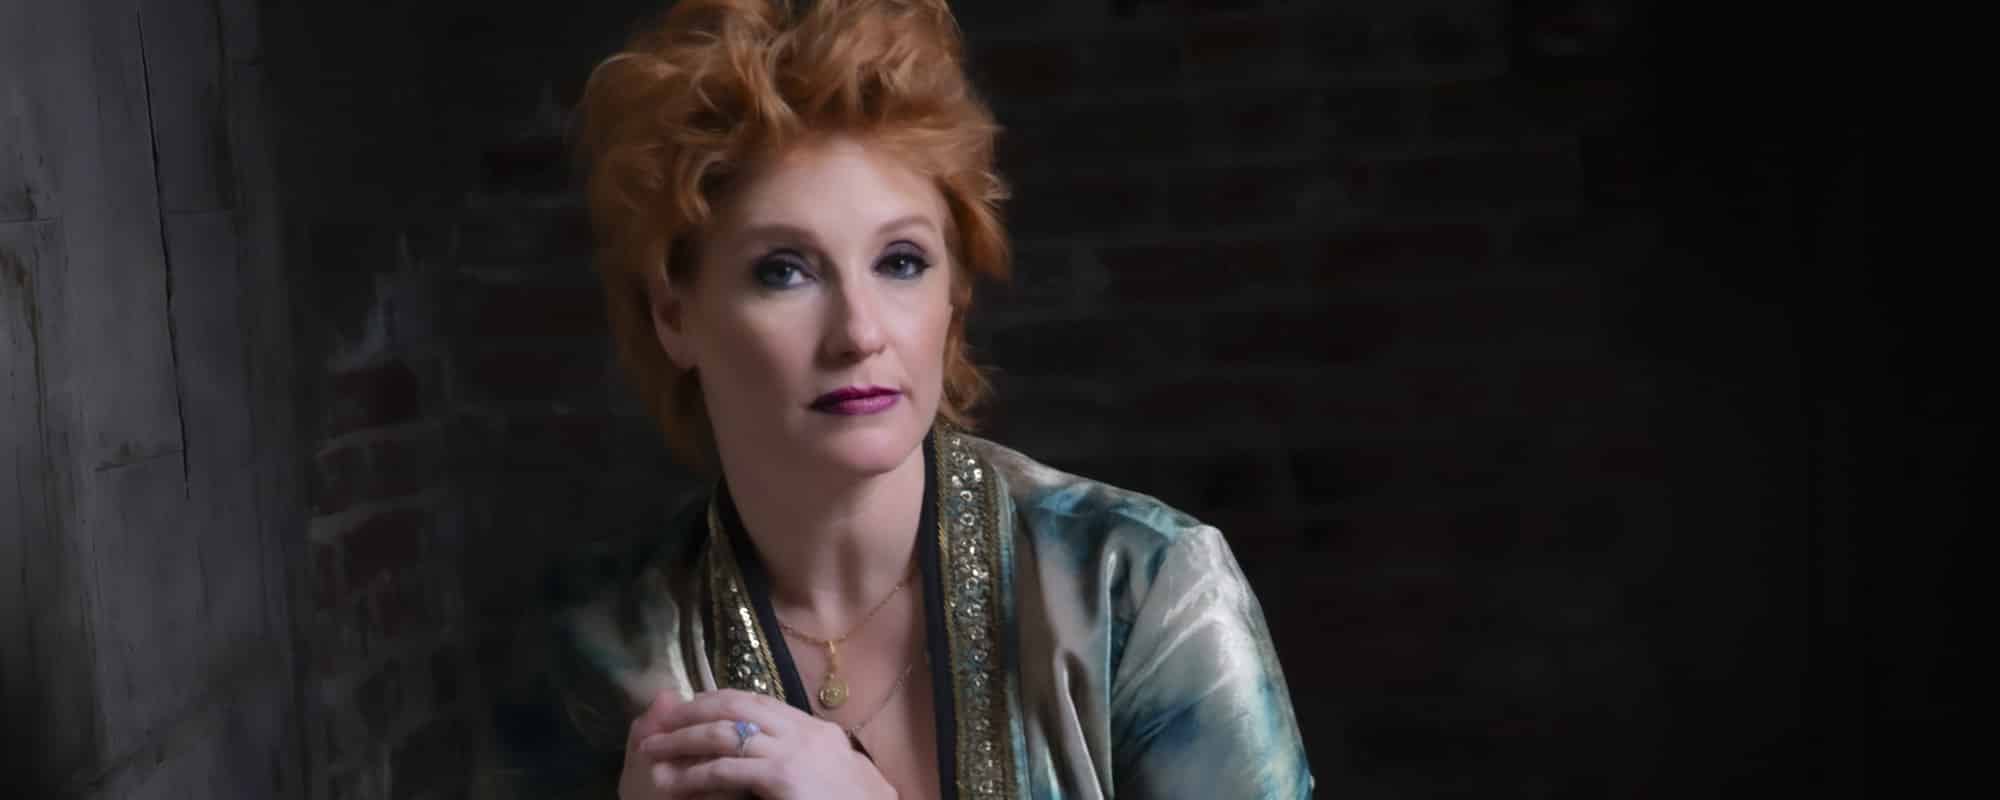 Leigh Nash Makes ‘Good Trouble,’ Talks New Music and Sixpence None The Richer Reunion